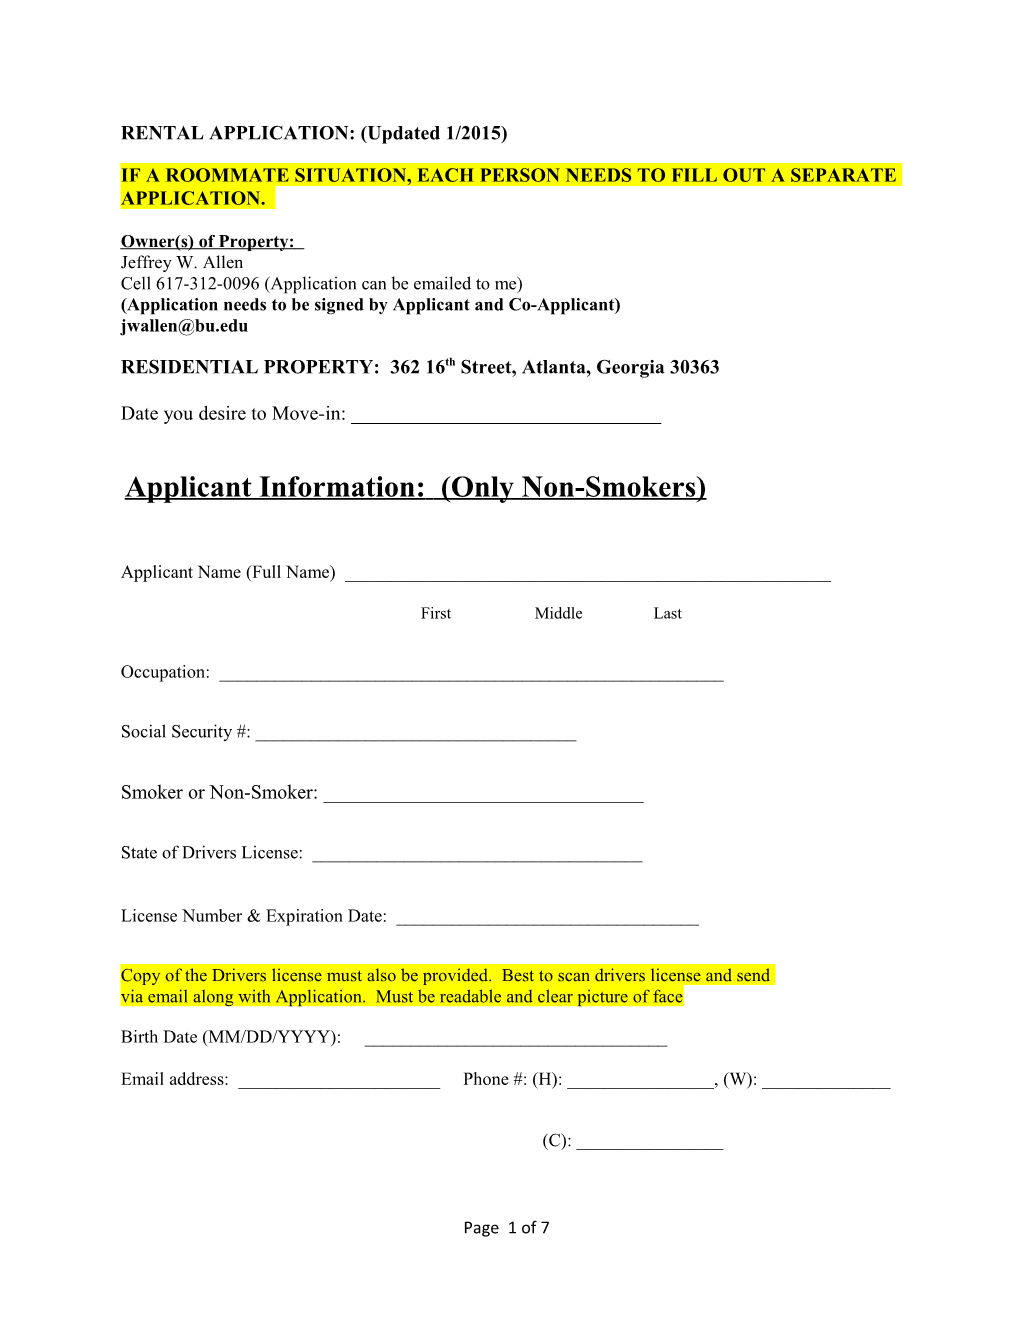 RENTAL APPLICATION: (Updated 1/2015)